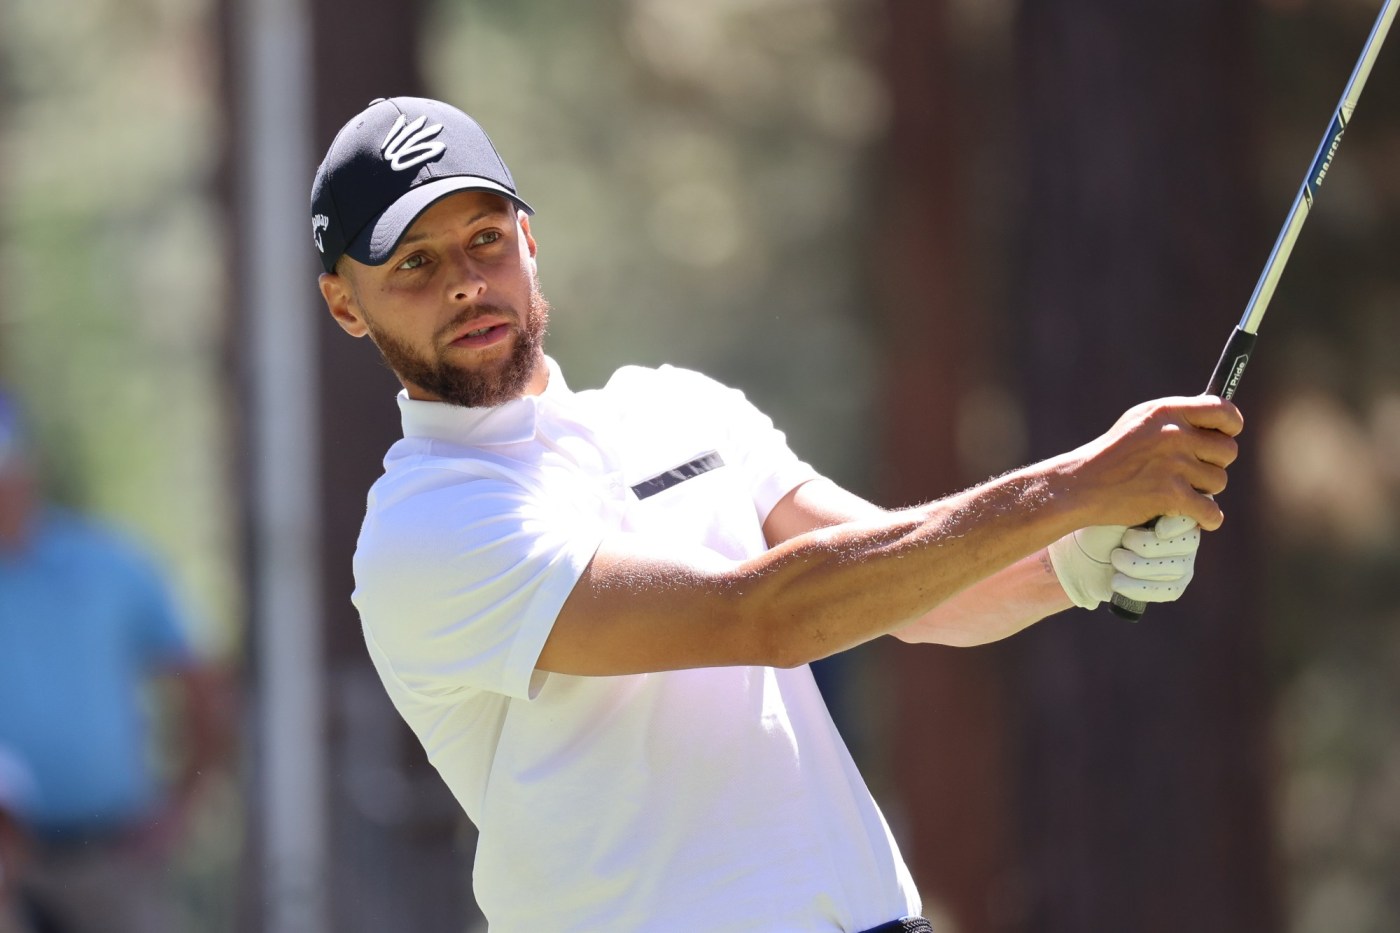 steph-curry-won’t-defend-tahoe-golf-title-due-to-olympic-commitment